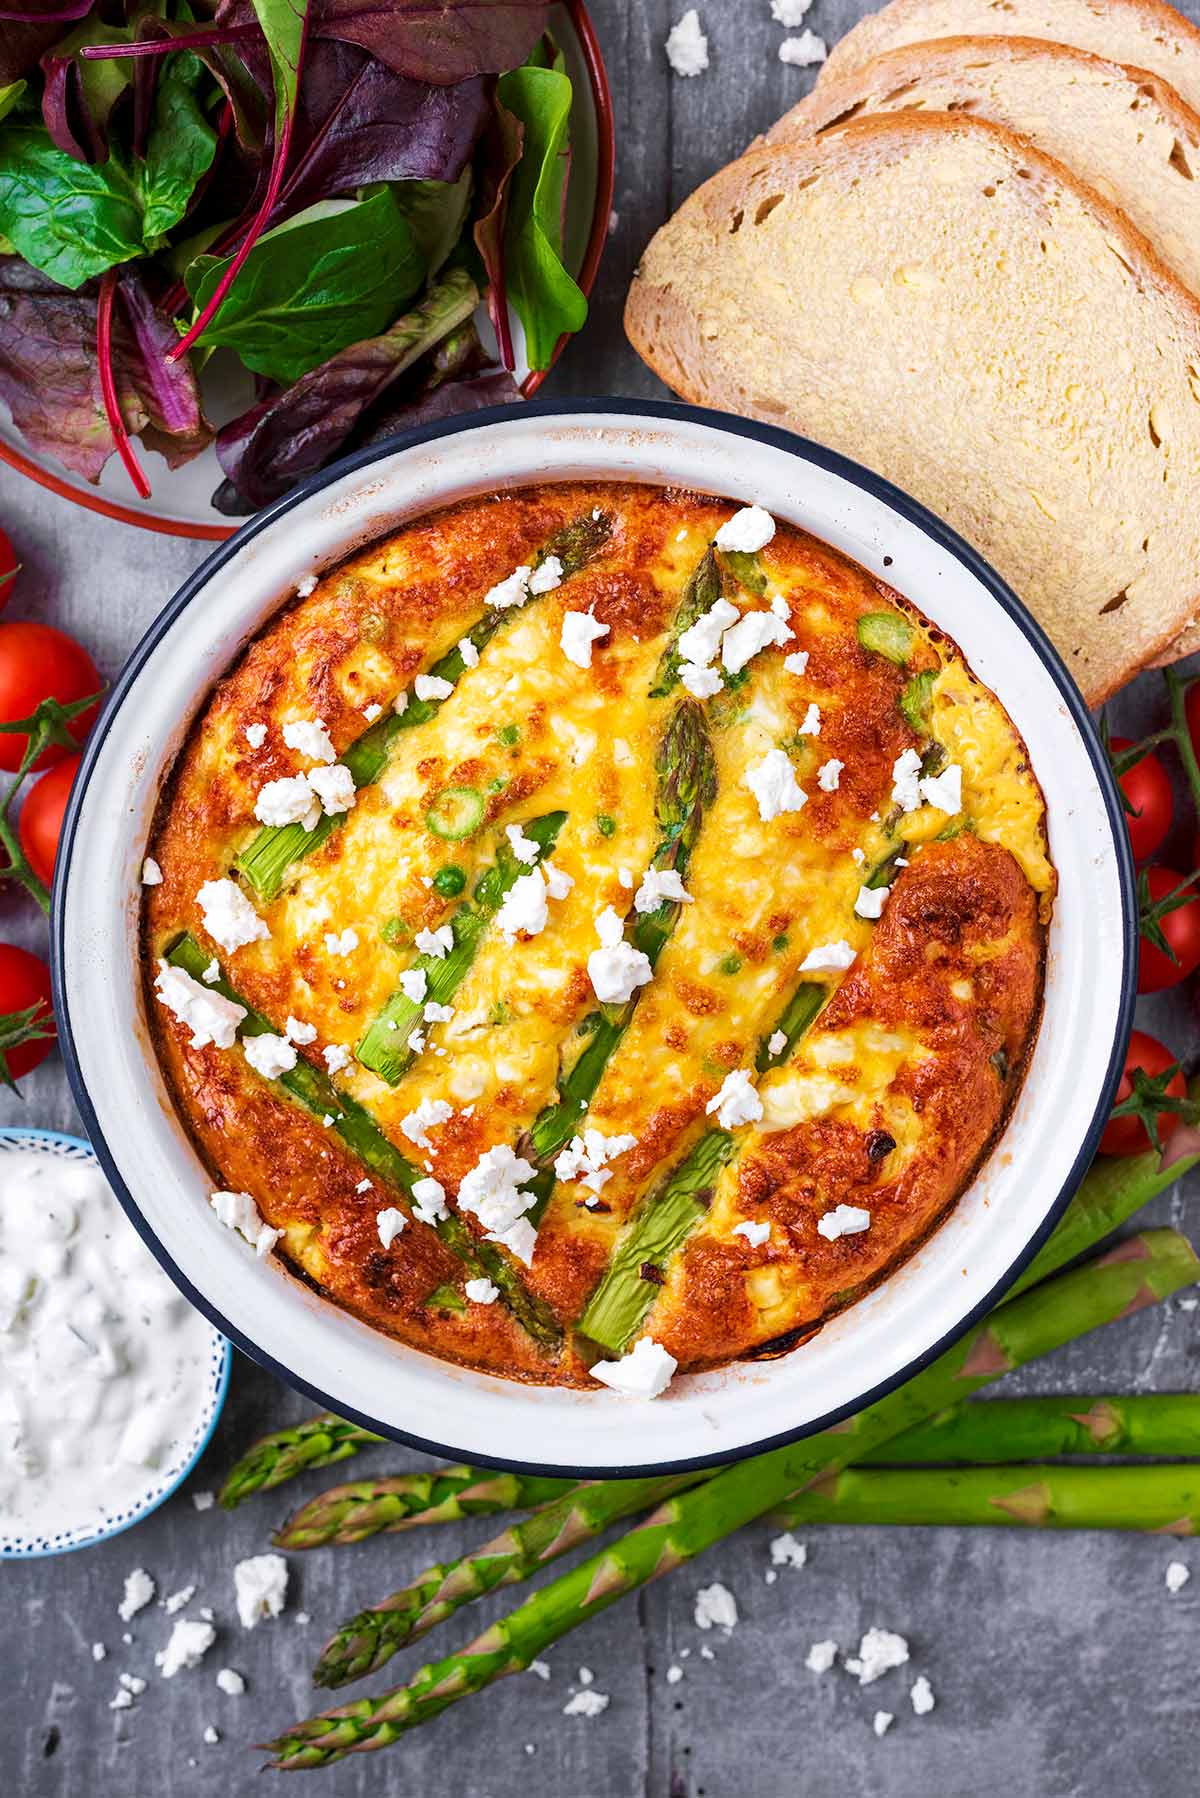 Feta and Asparagus Frittata in a dish next to some asparagus spears and buttered bread.